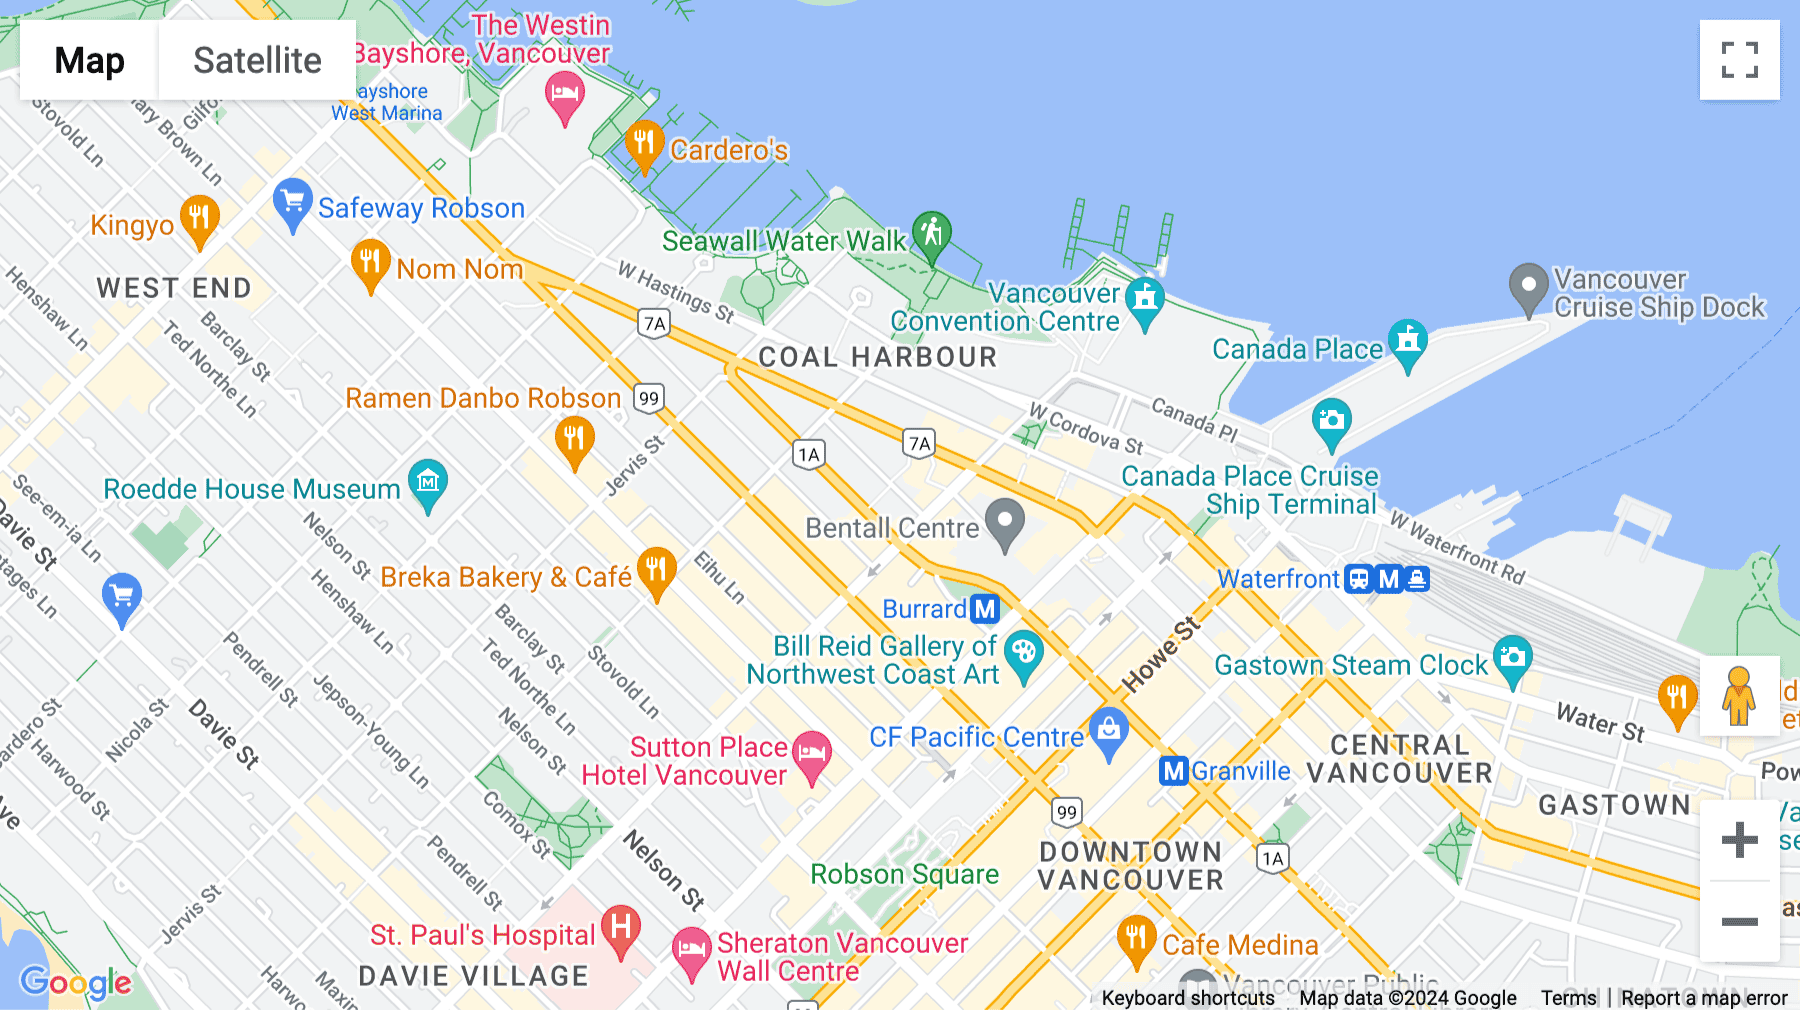 Click for interative map of 535 Thurlow Street Suite 100, Vancouver, Vancouver